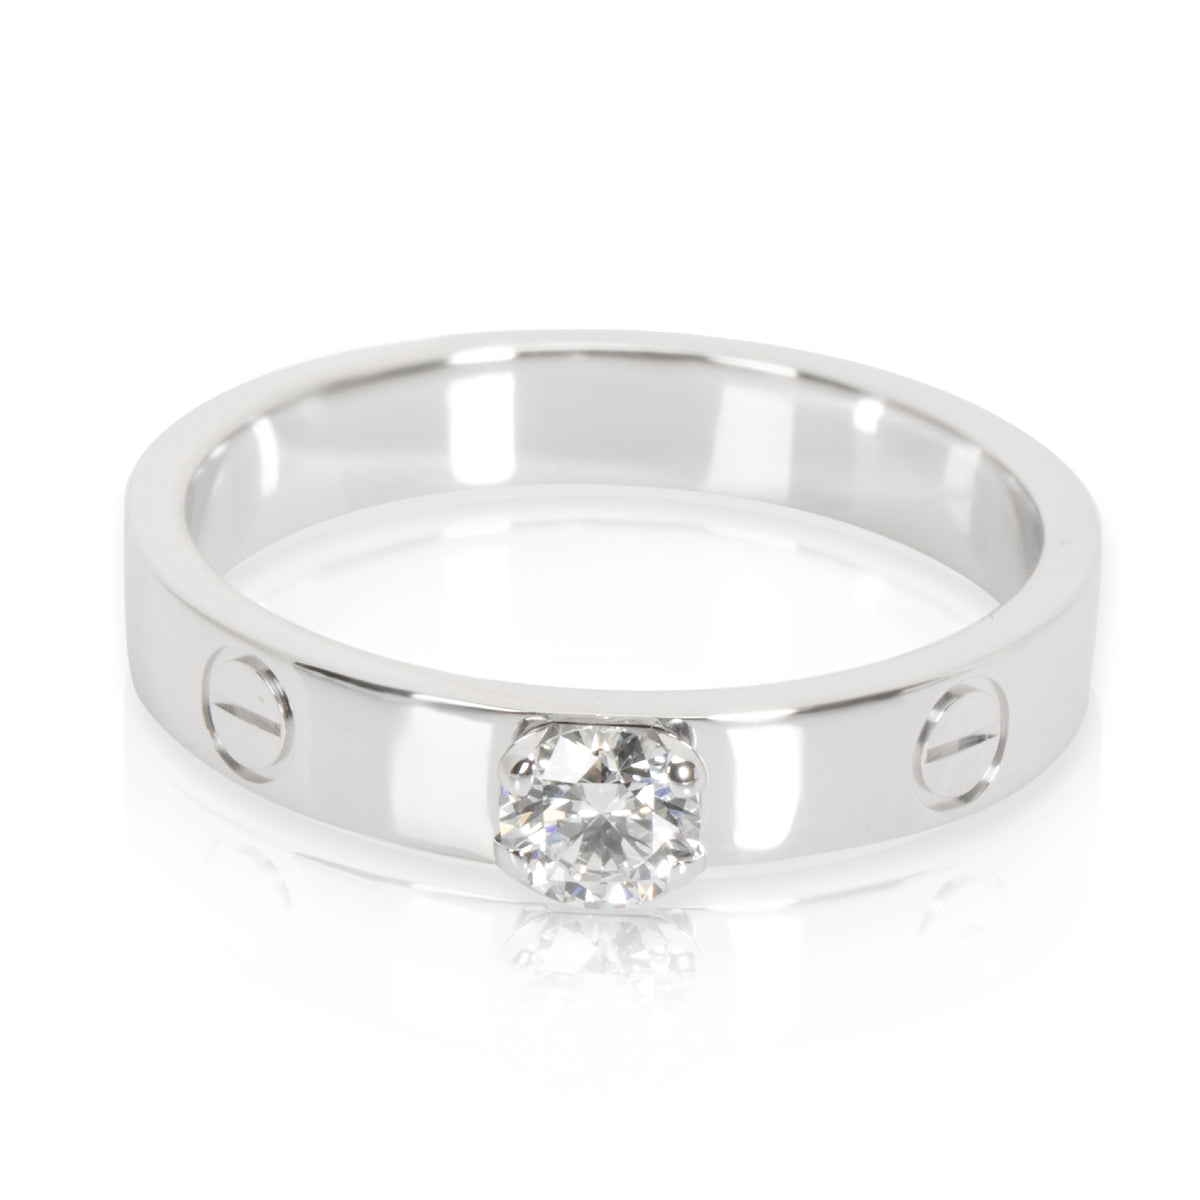 Cartier Love Solitaire Diamond Ring in 18KT White Gold 0.23 CTW